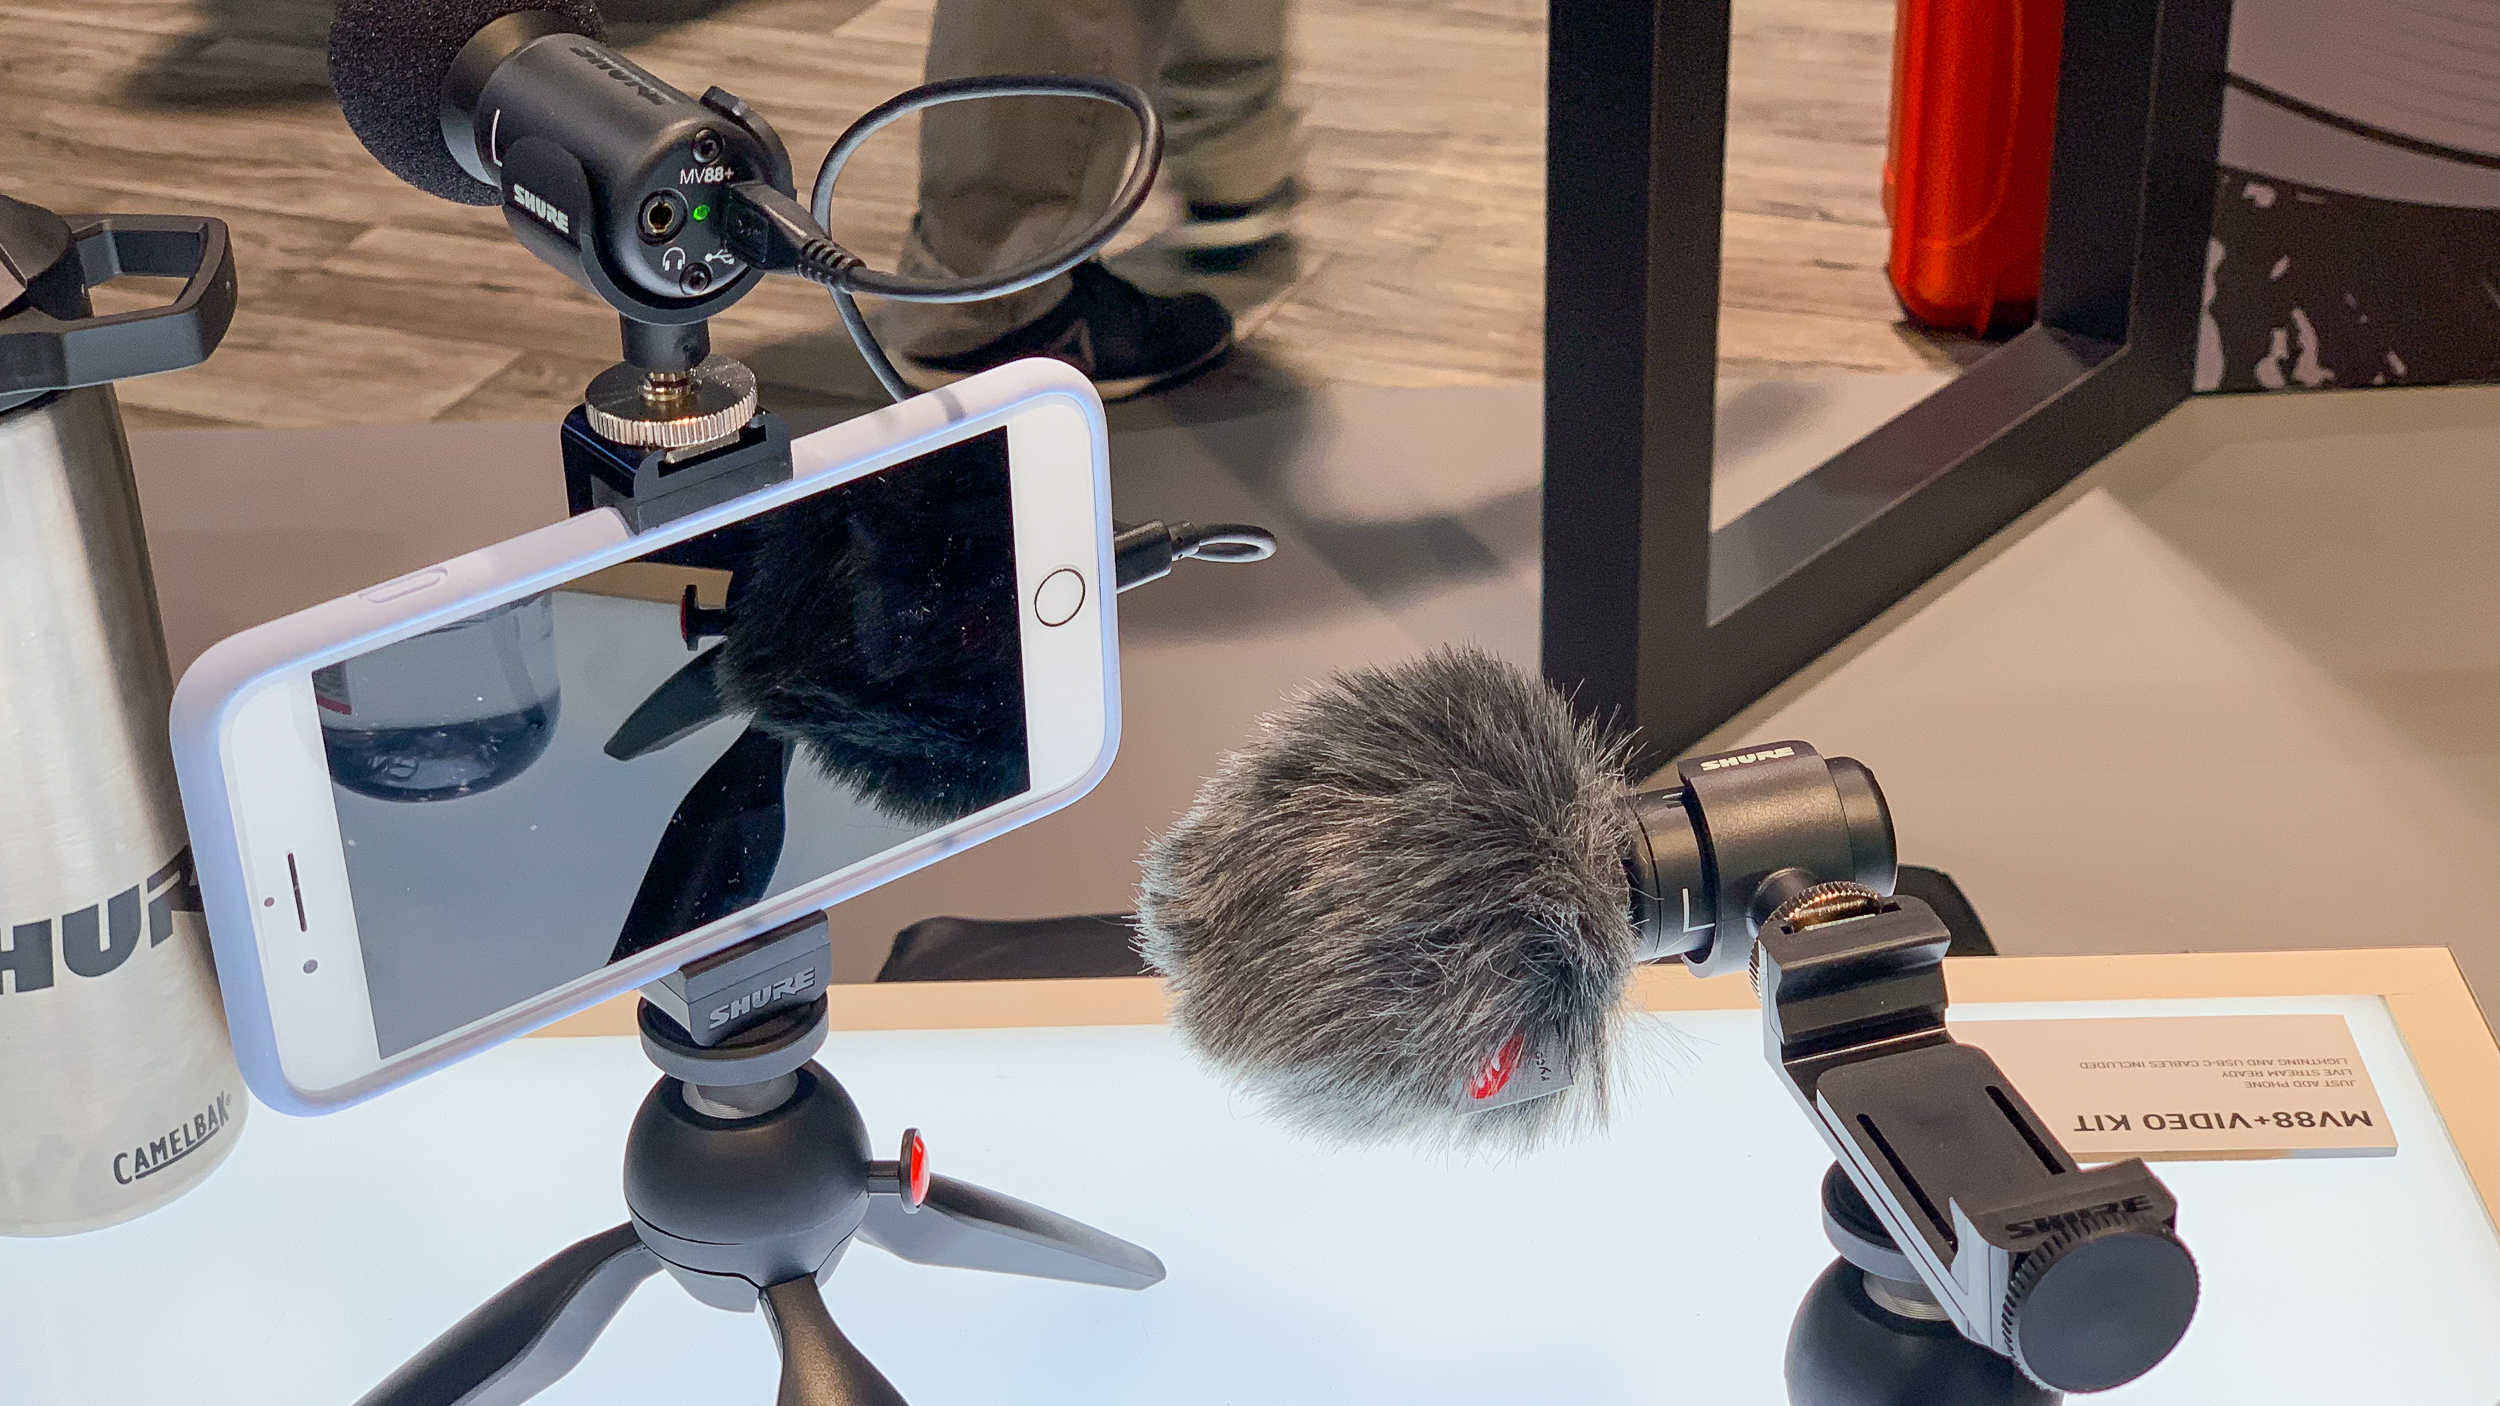 Video: Hands-on with Shure's MV88+ iPhone Video Kit - 9to5Mac